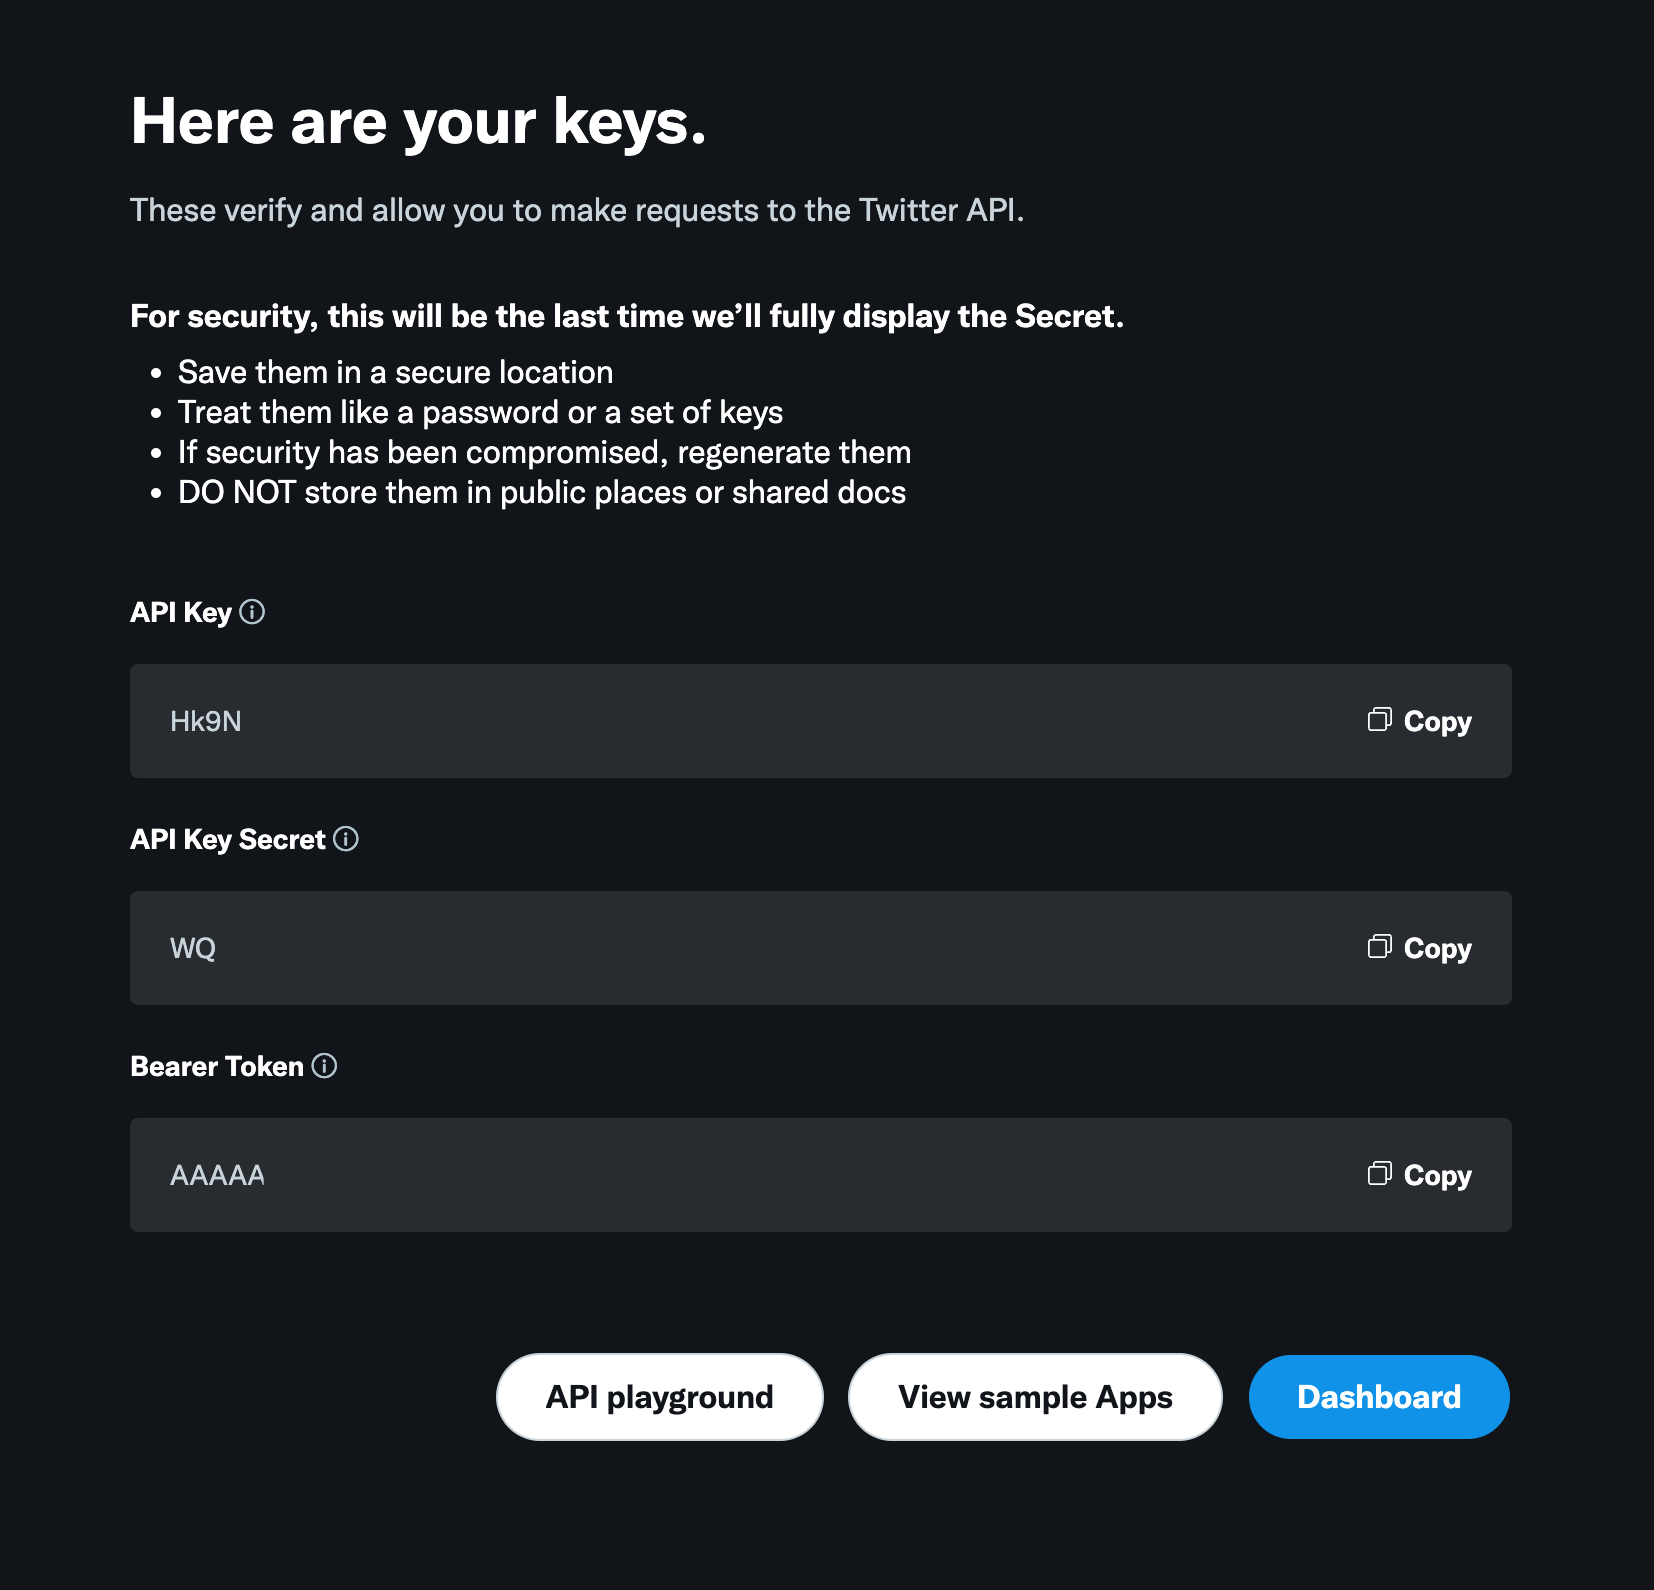 image shows a page presenting your API Key, your API Key Secret and your Bearer Token